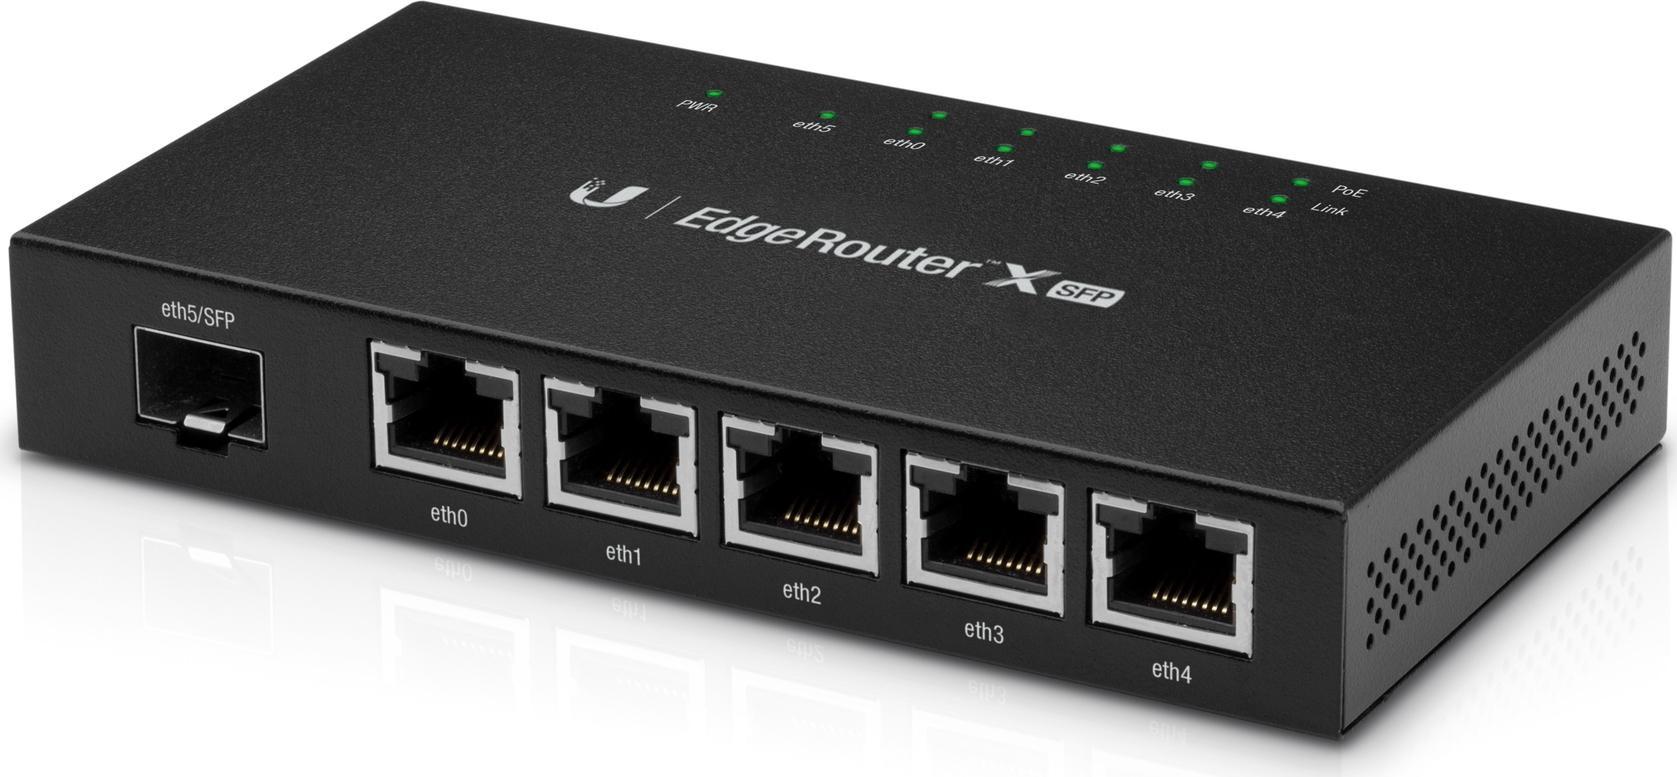 Ubiquiti Networks EdgeRouter X SFP Router | Full Specifications